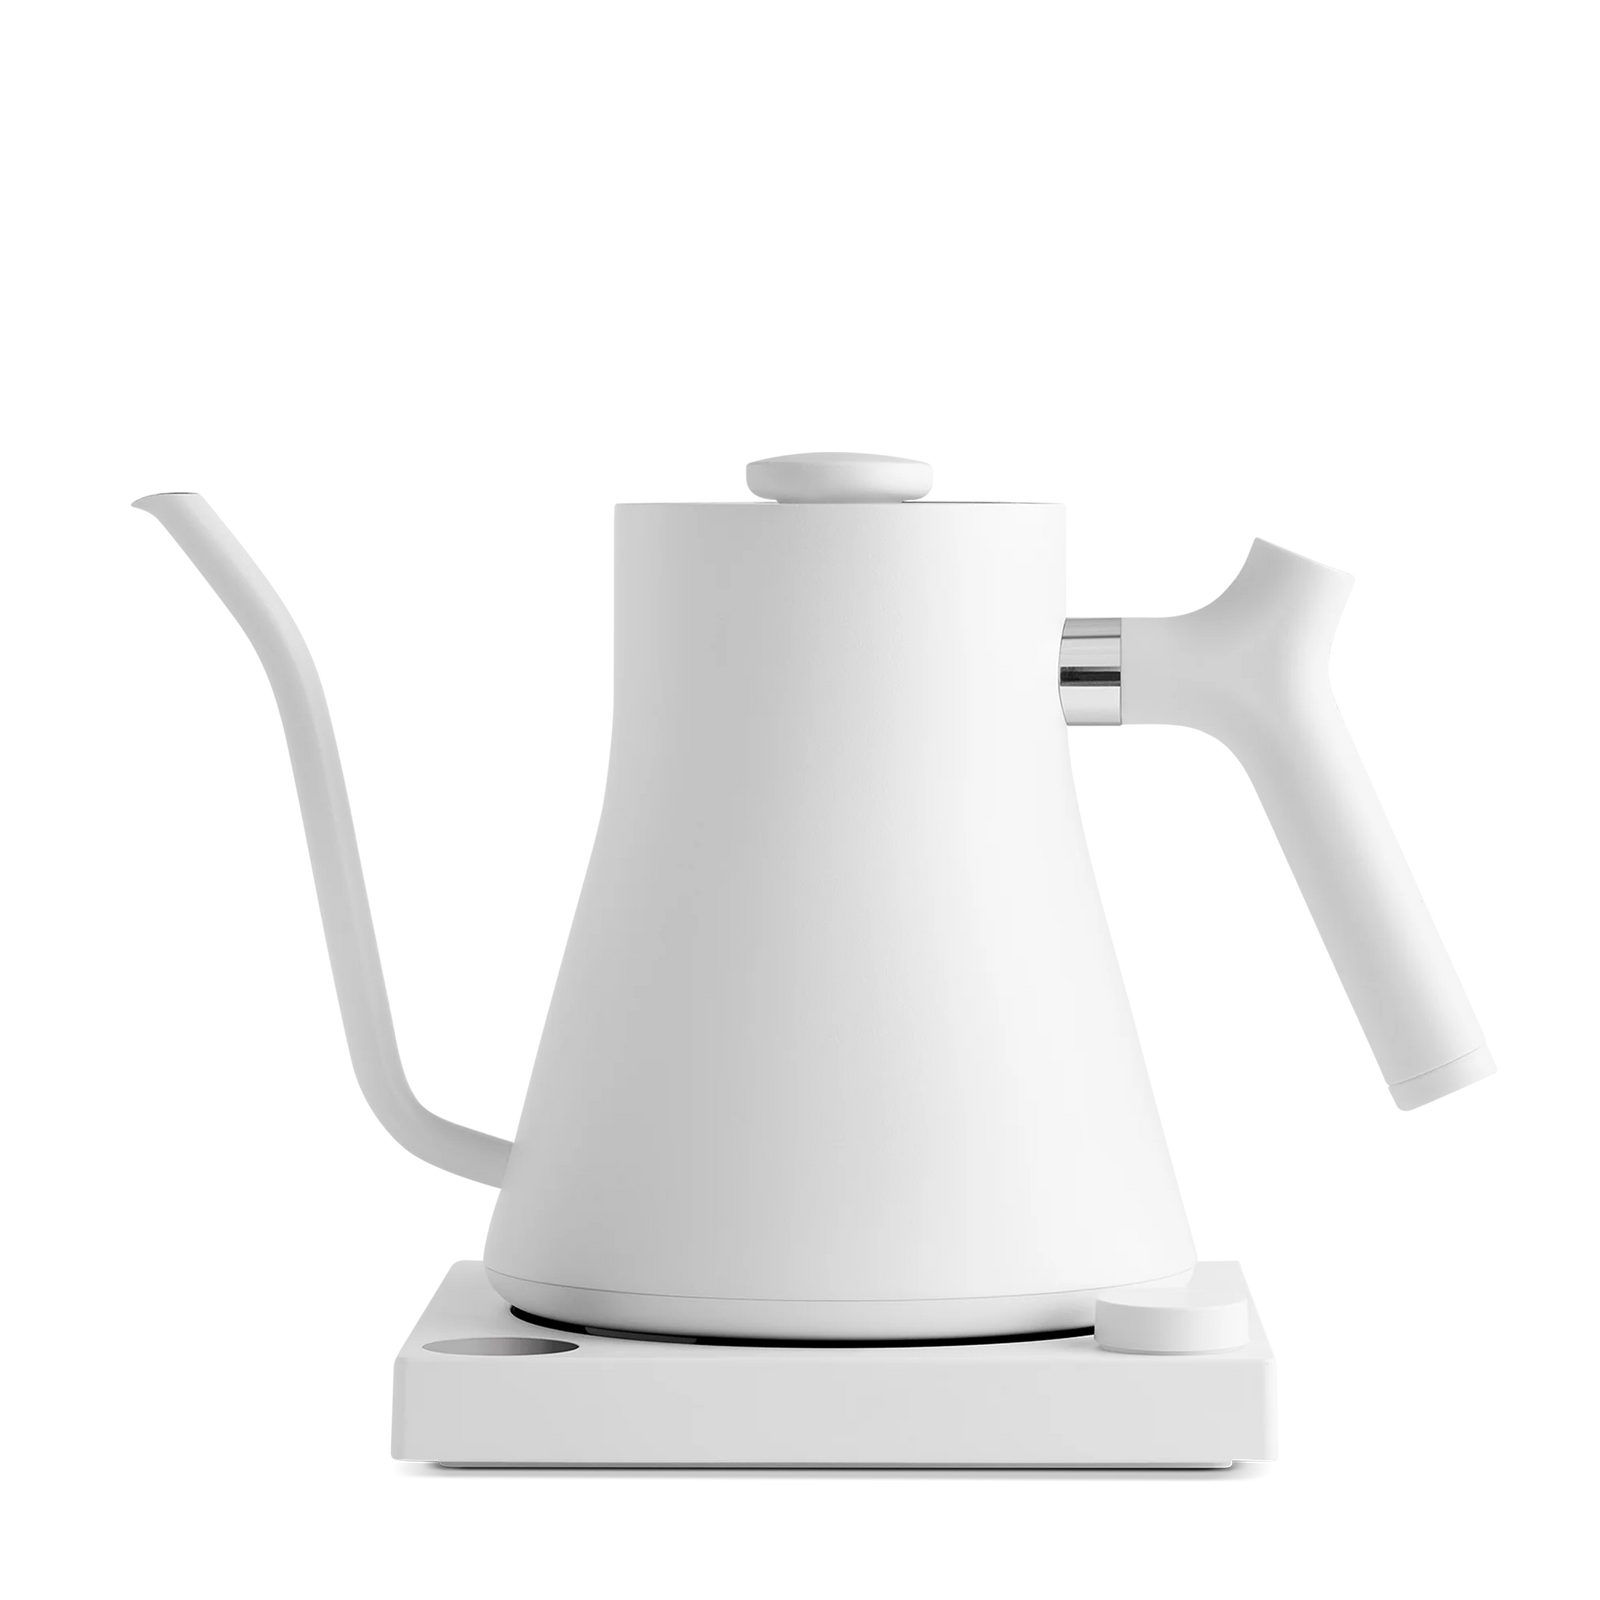 Fellow Tally Pro Out of Stock? : r/pourover